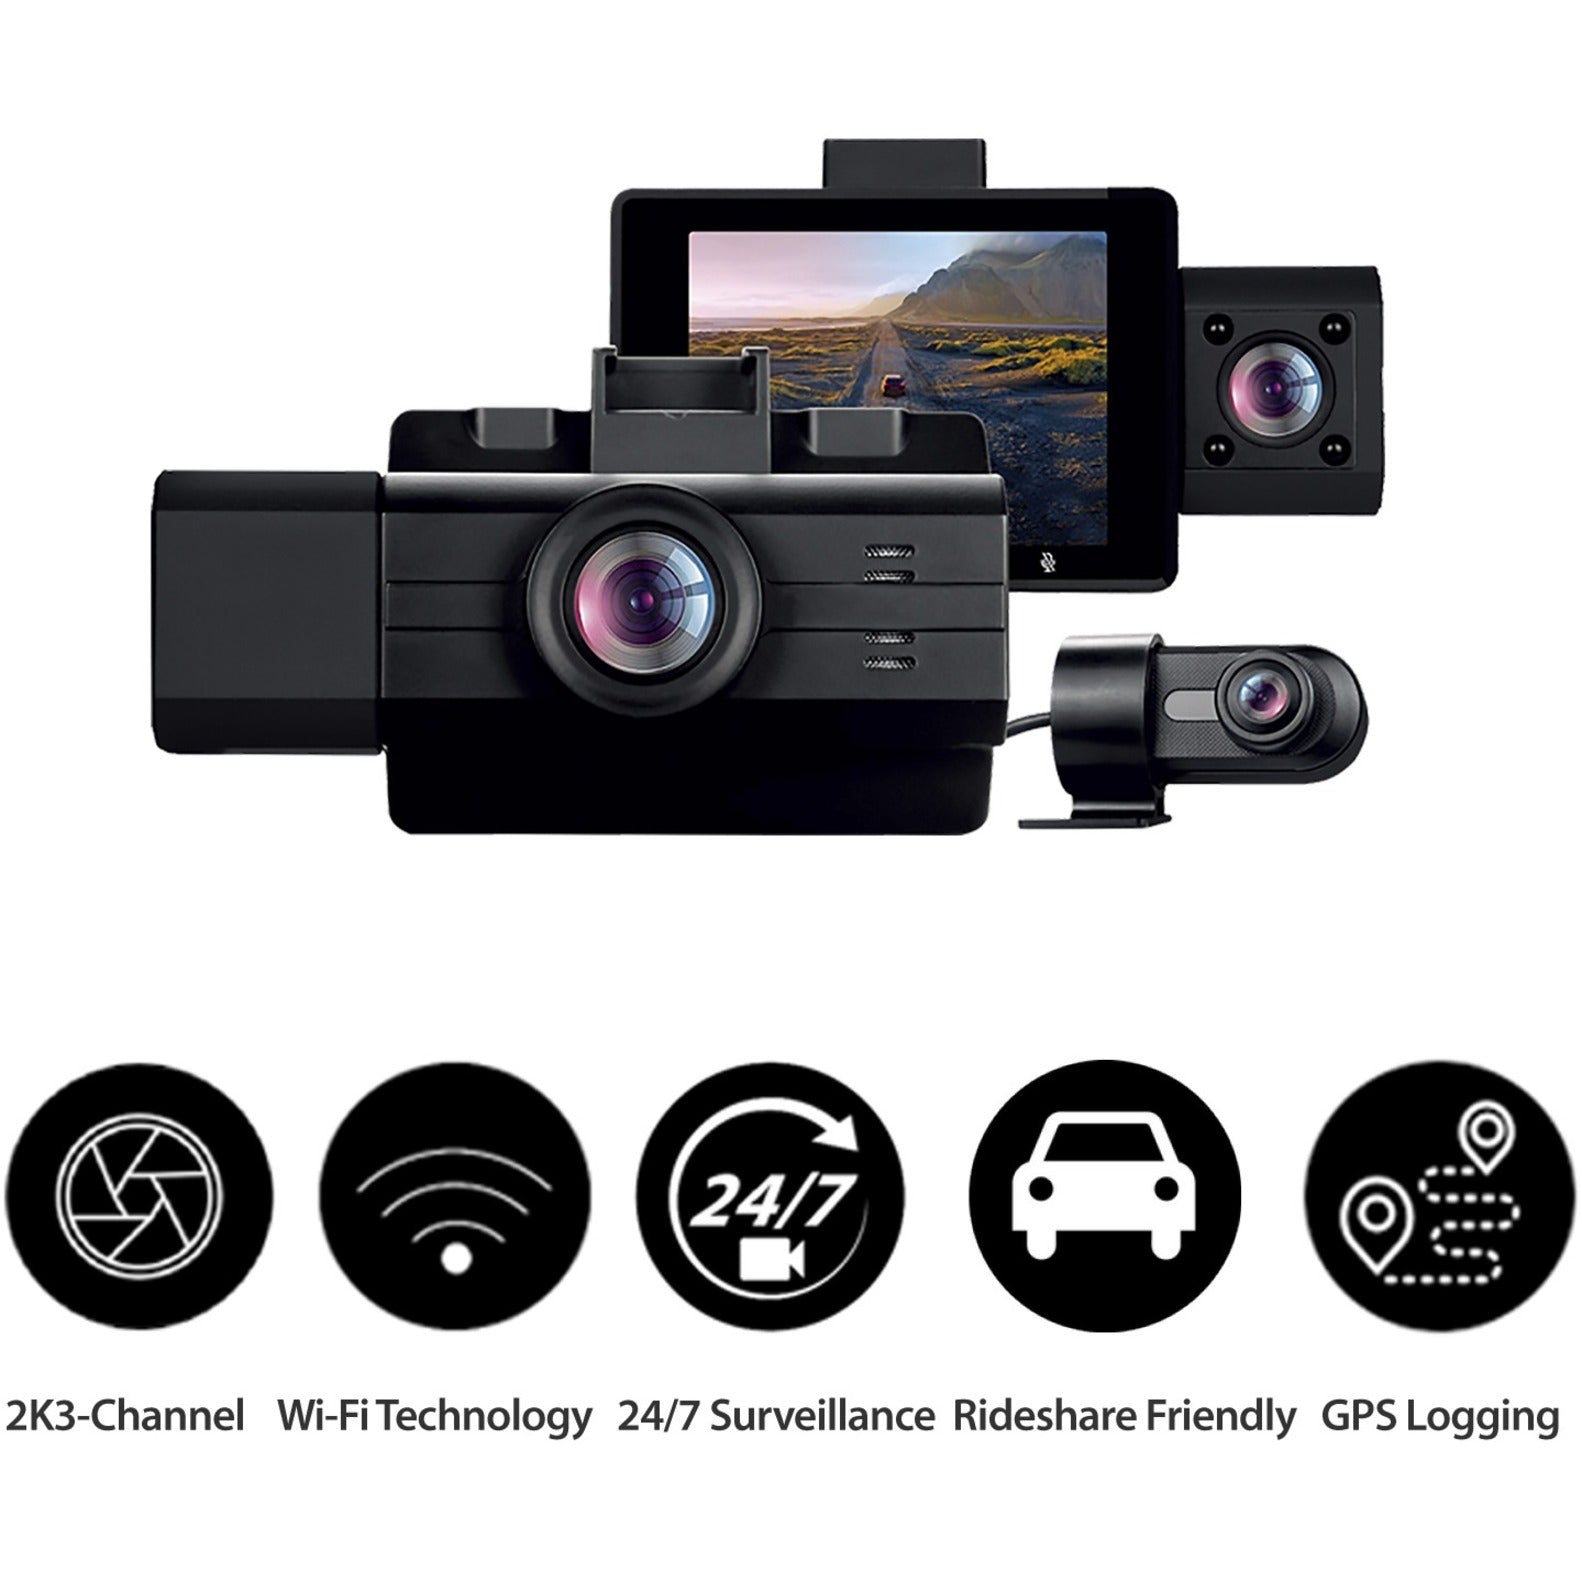 myGEKOgear GOSP32G Scout Pro Vehicle Camera, 2K 3-Channel Dash Cam with Wide Angle View, Instant Video Access, and 32GB SD Card Included